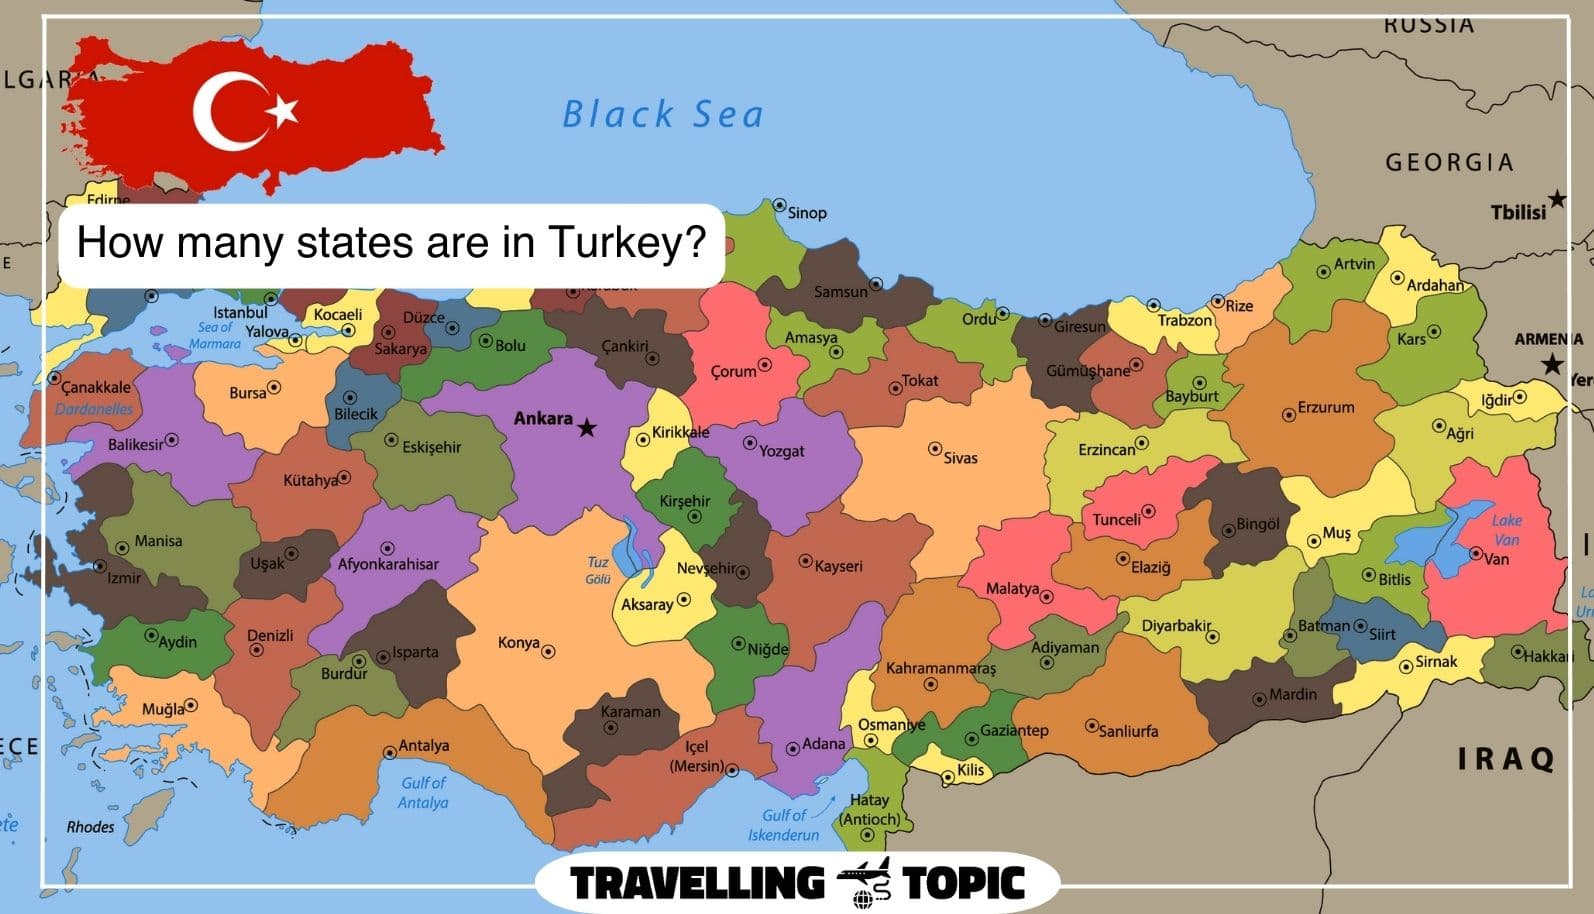 How many states are in Turkey?